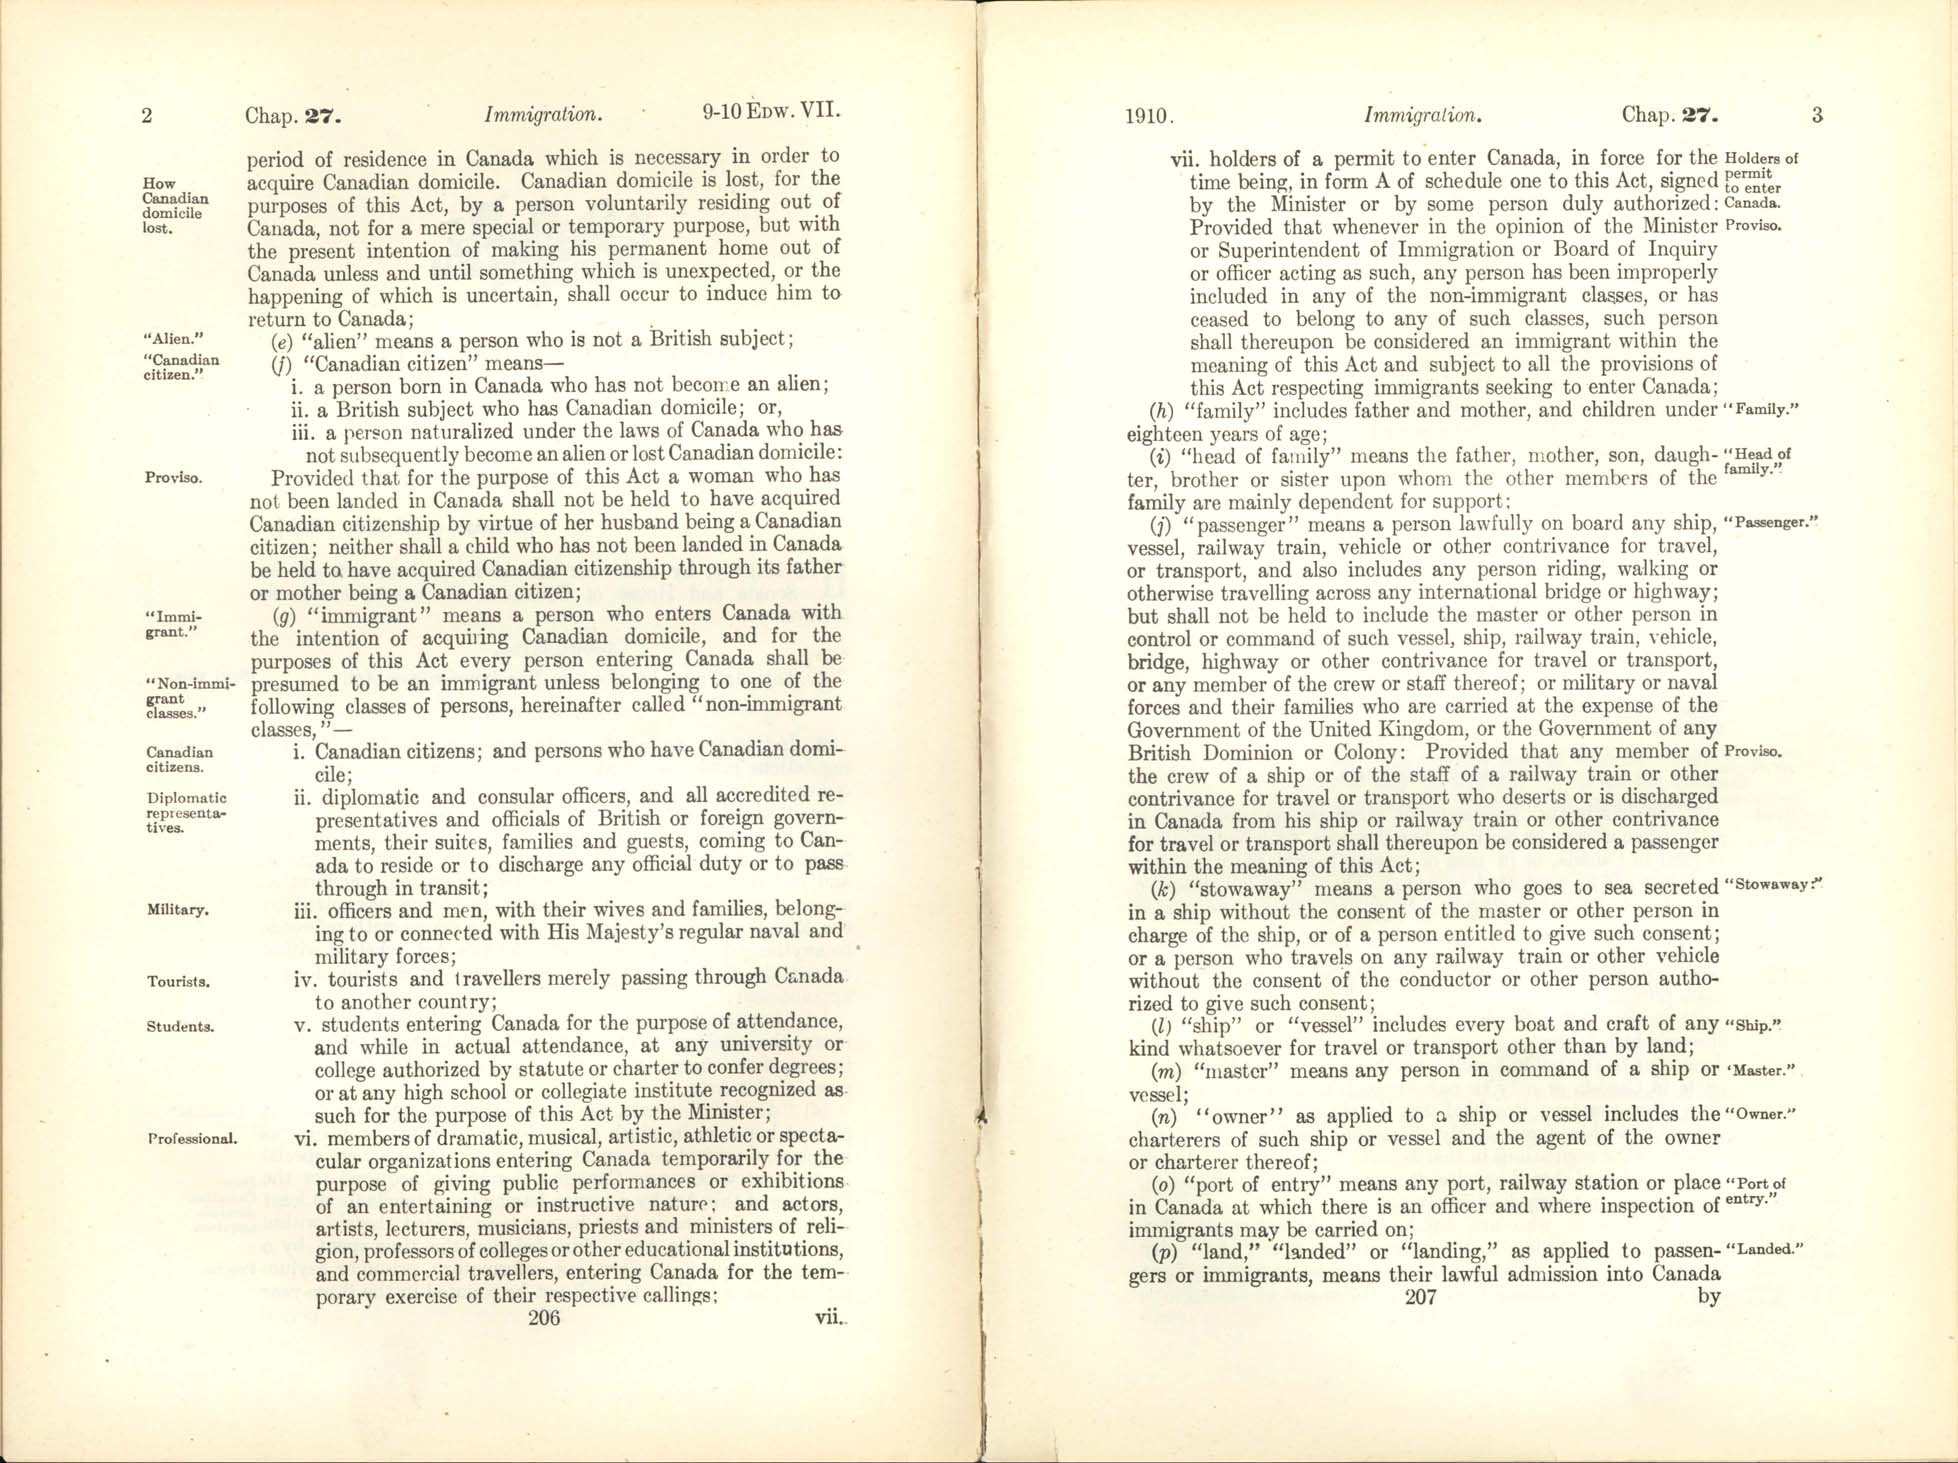 Chap. 27 Page 206, 207 Immigration Act, 1910